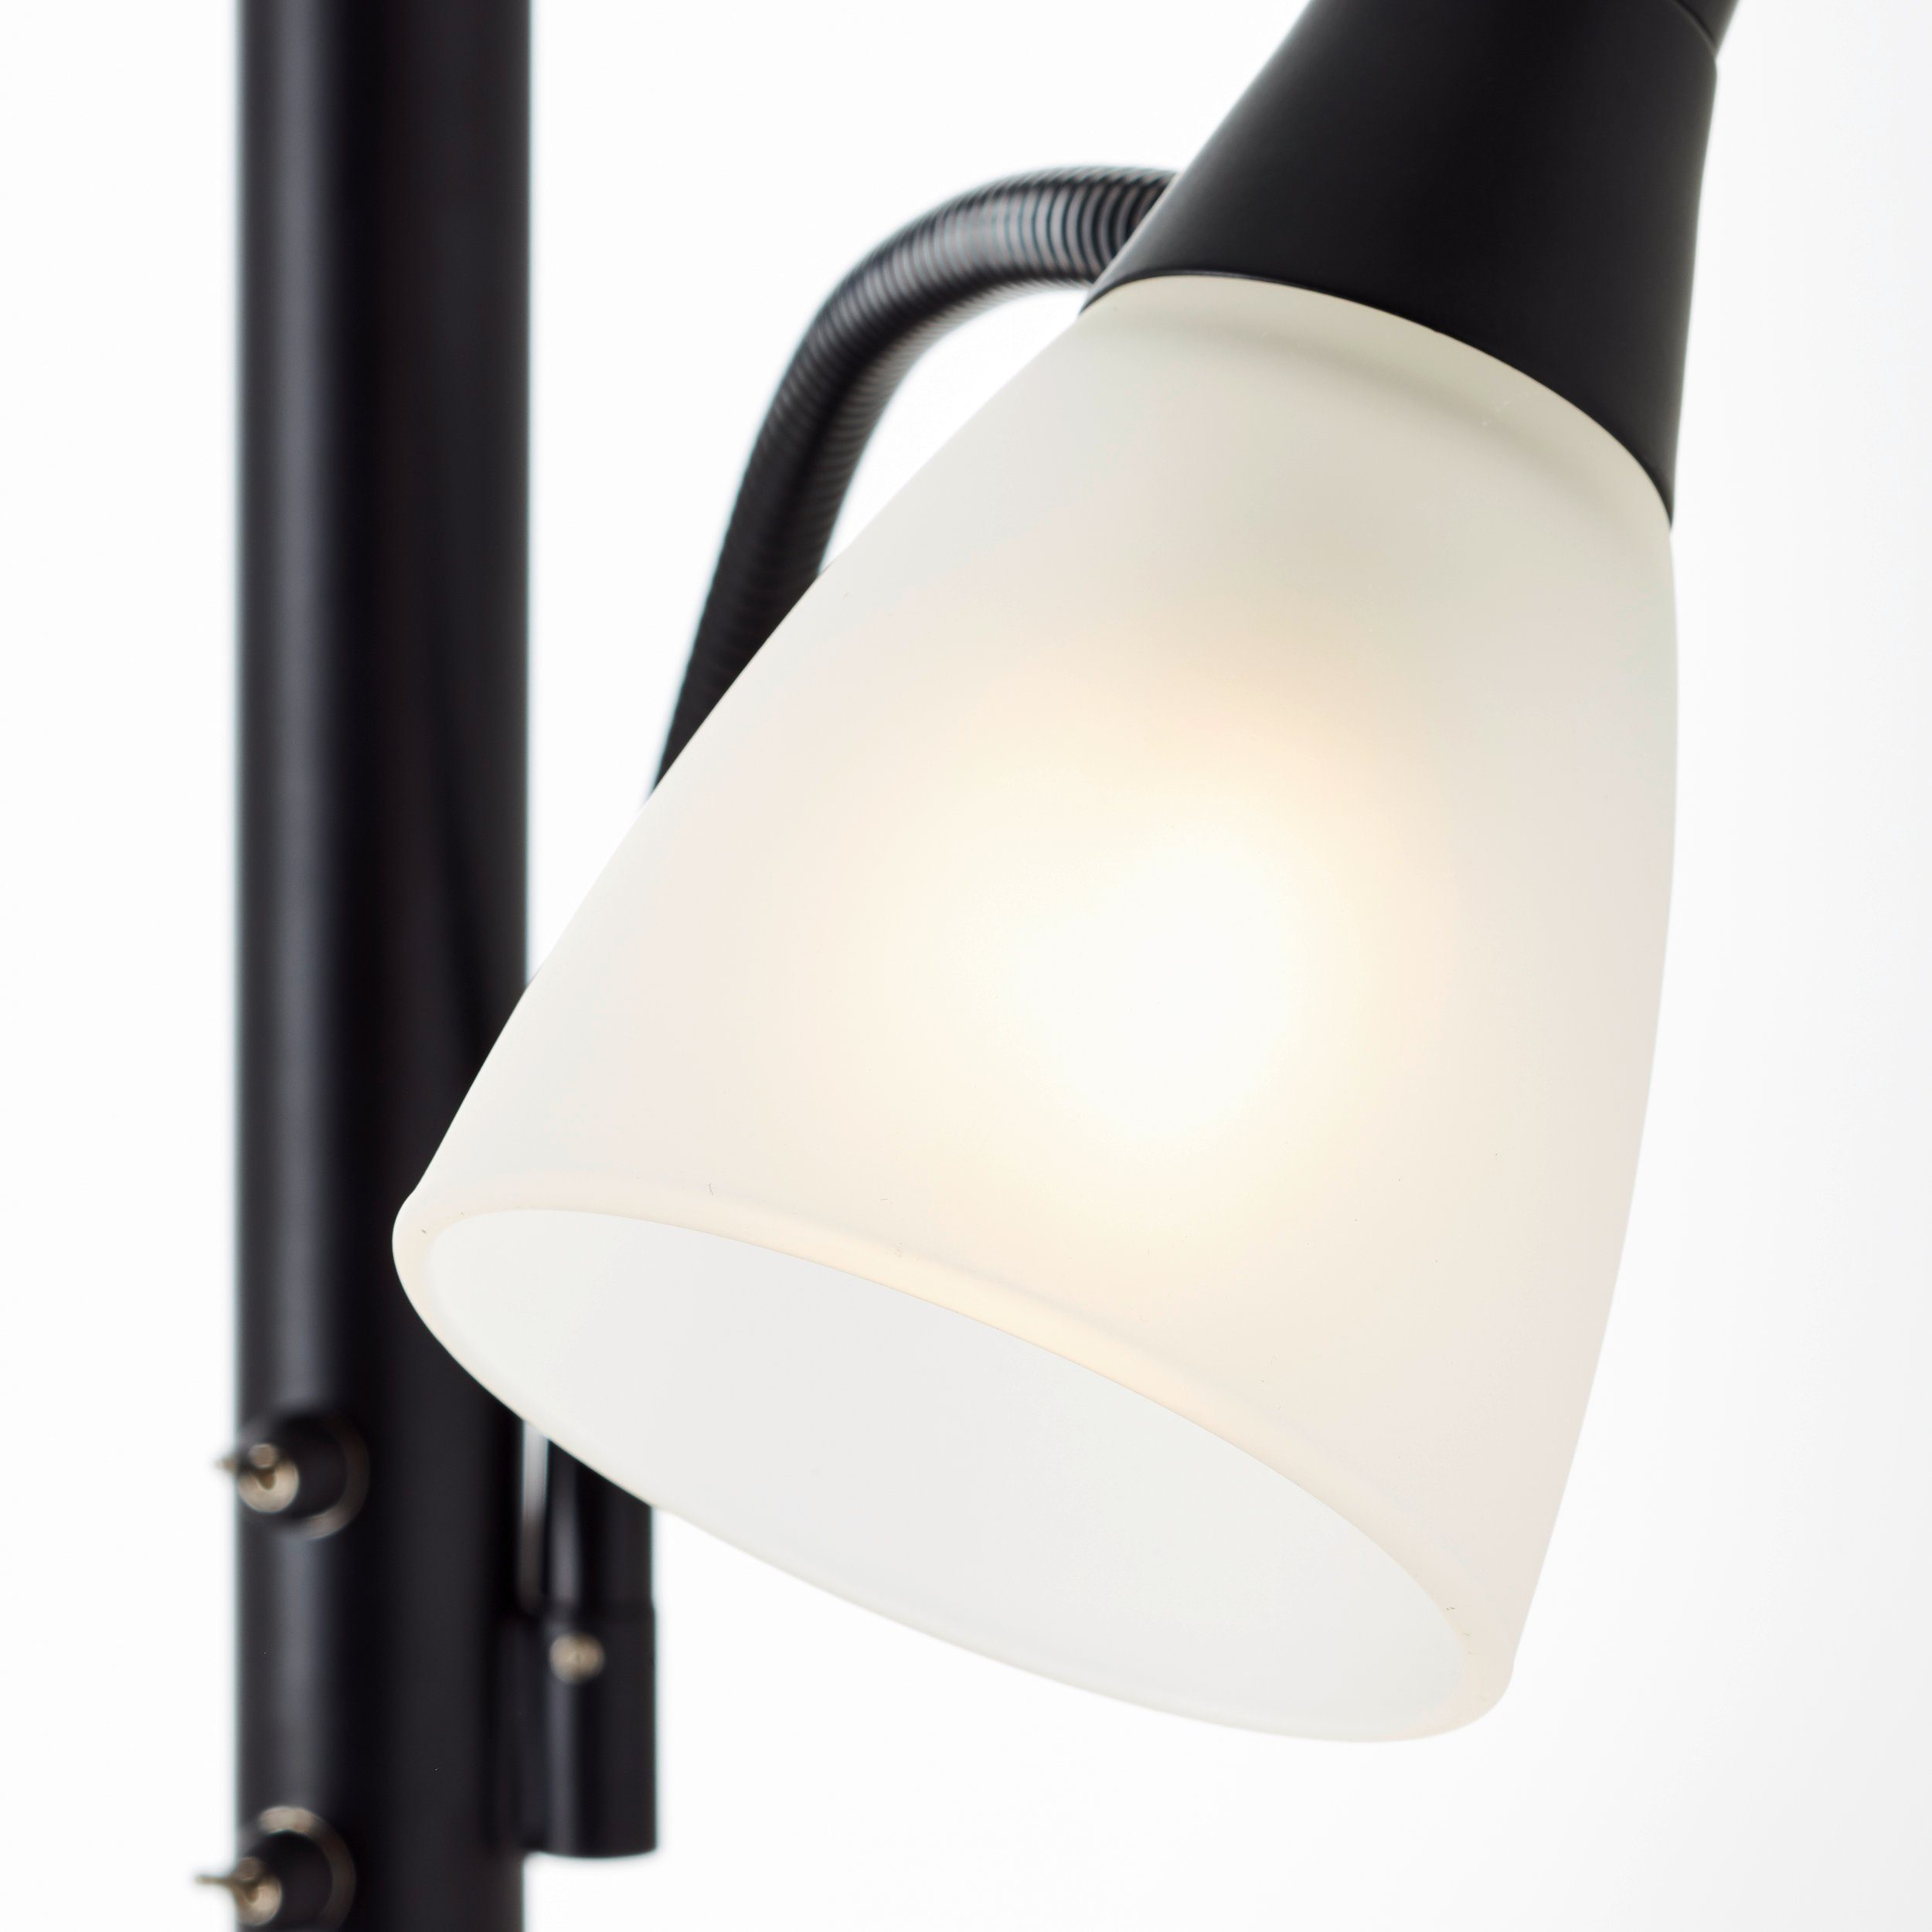 Brilliant Stehlampe Lucy, Lucy LED Lesearm 1x 5 schwarz, Deckenfluter W Metall/Glas, A60, E27